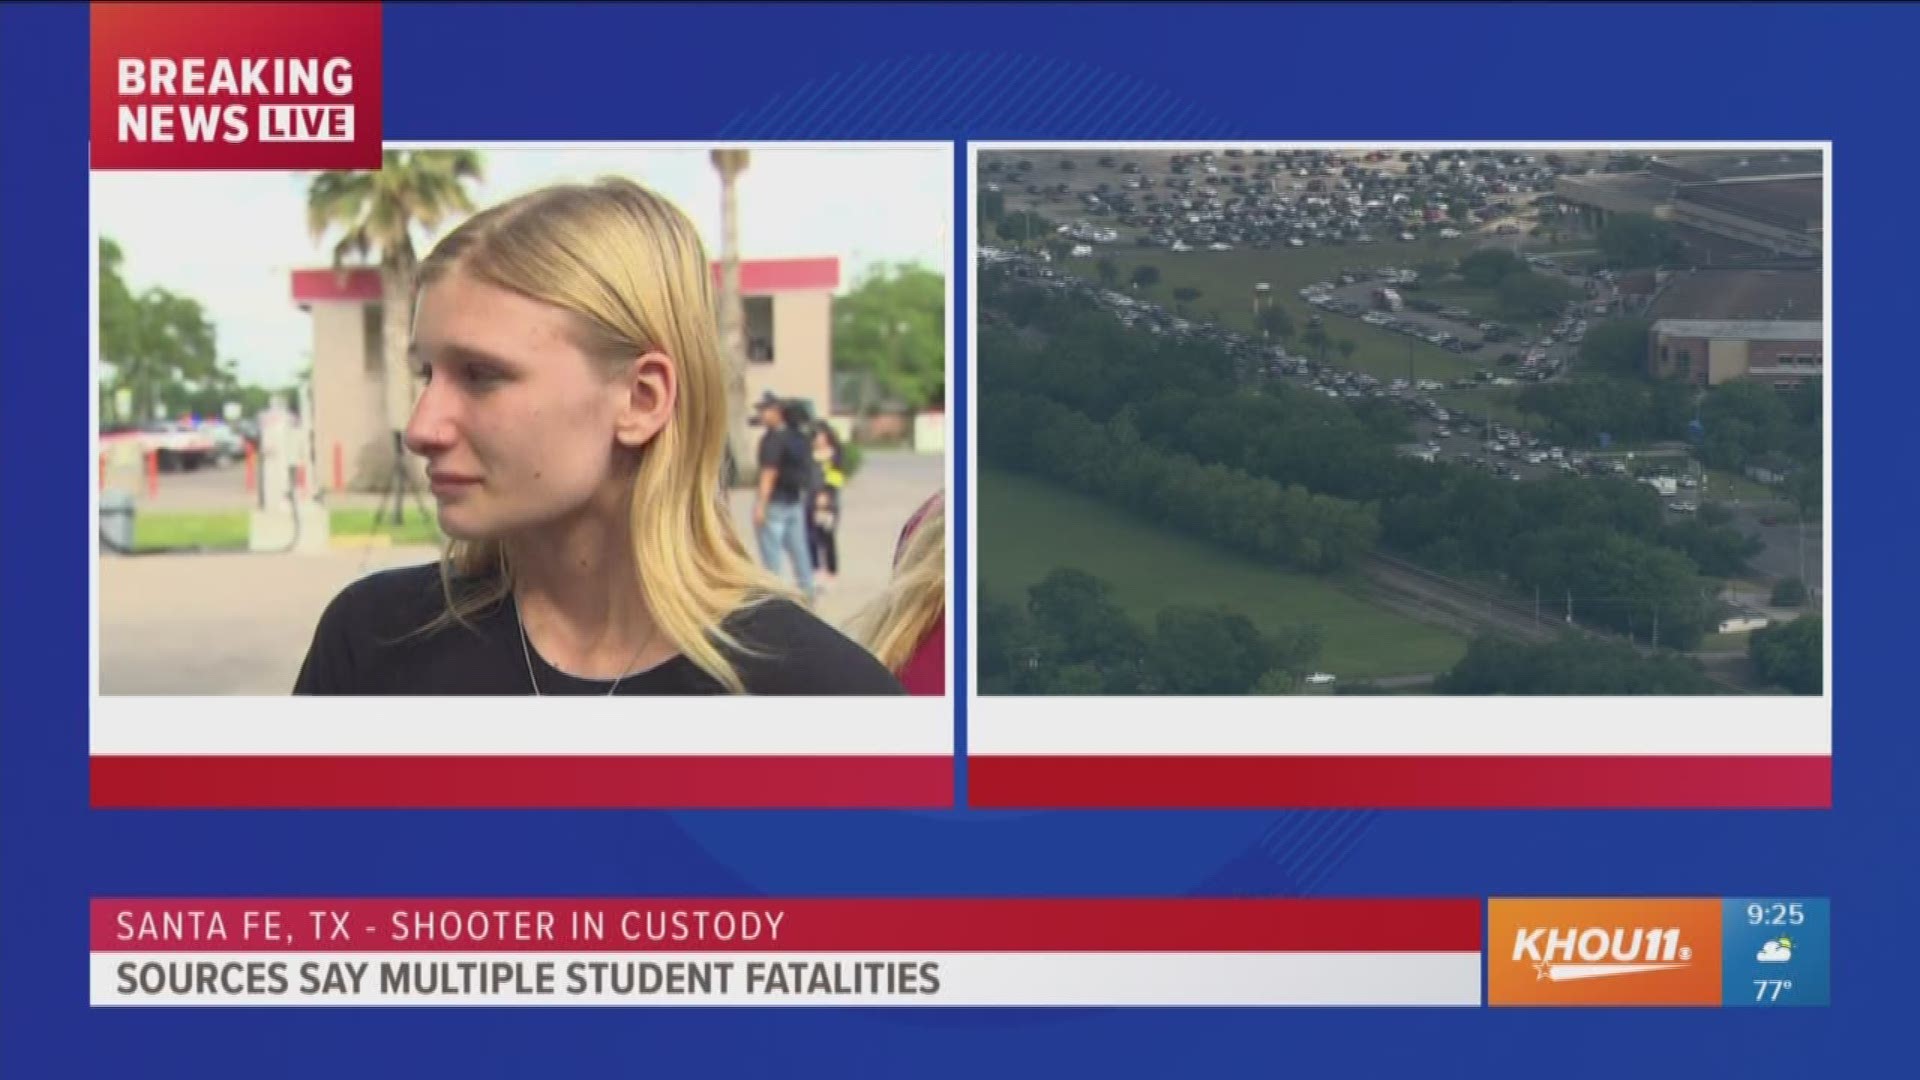 A student recounts running out of the school, hearing shots, seeing her friend get shot at Santa Fe High School in Texas. 